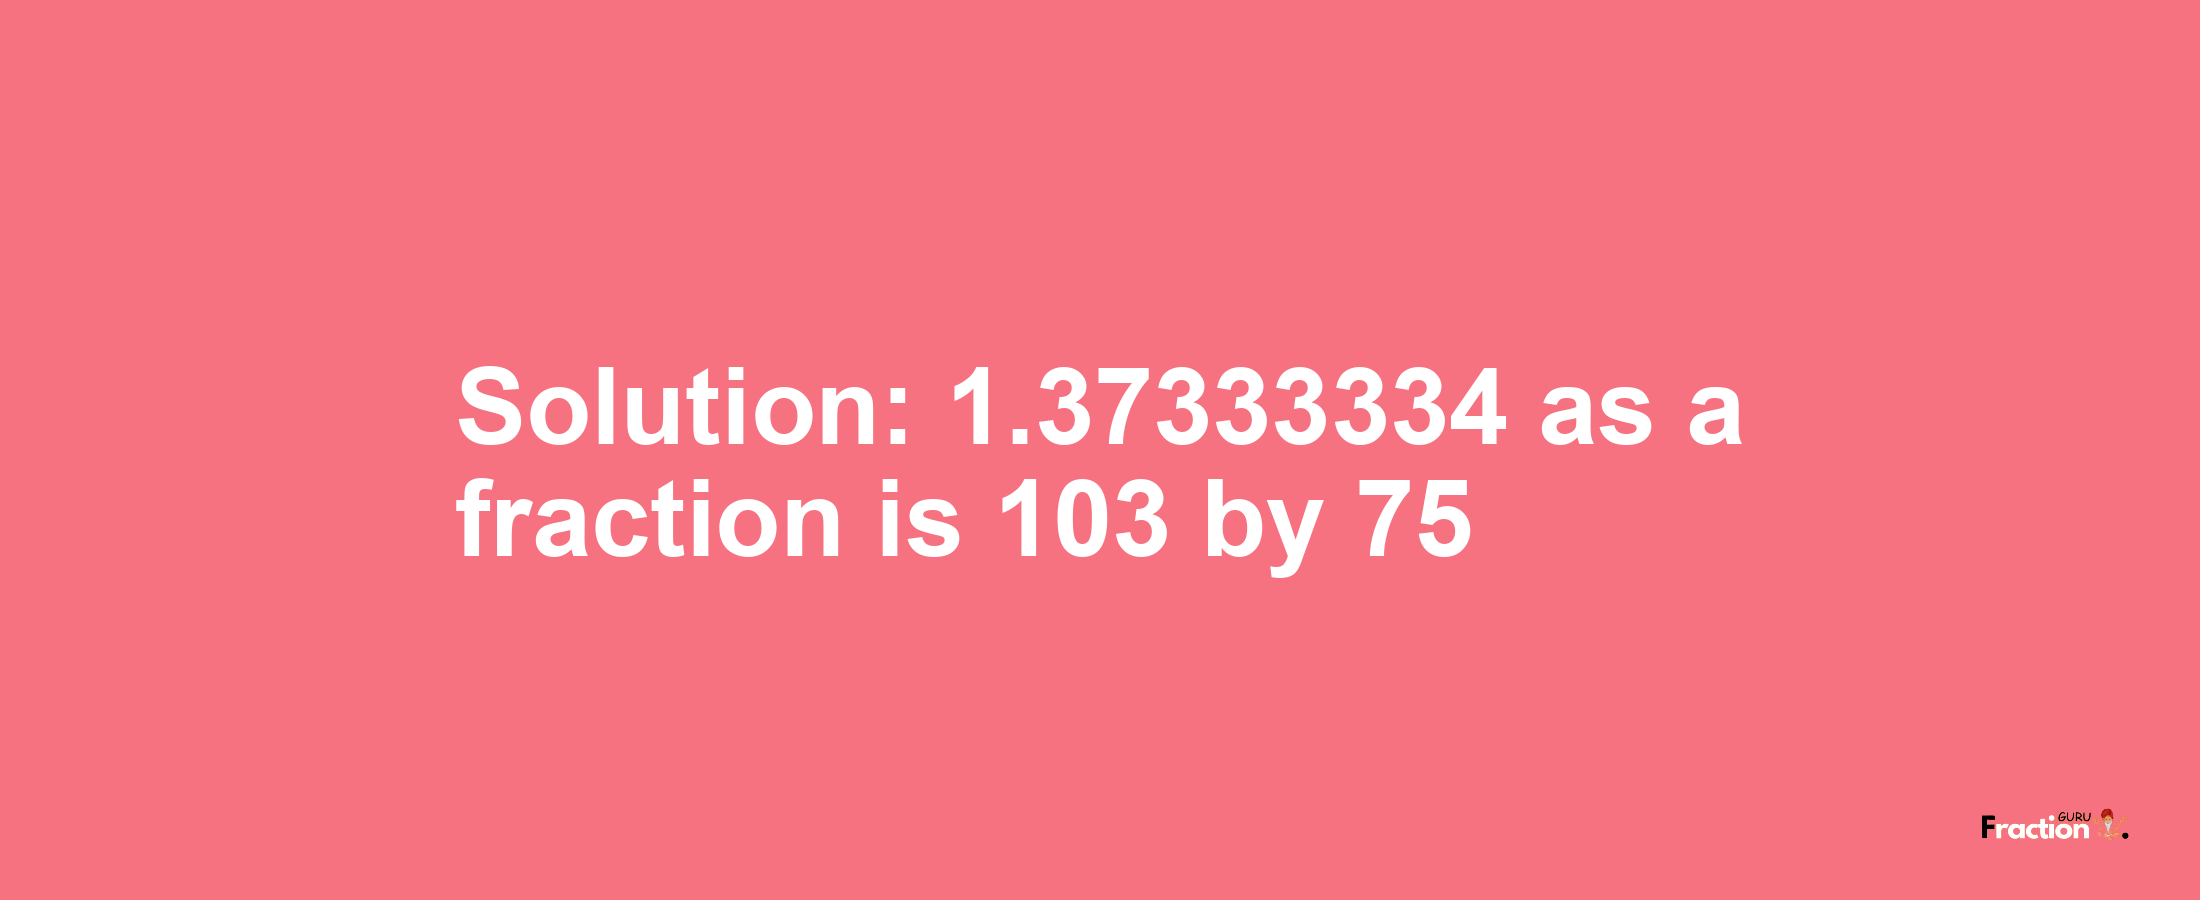 Solution:1.37333334 as a fraction is 103/75